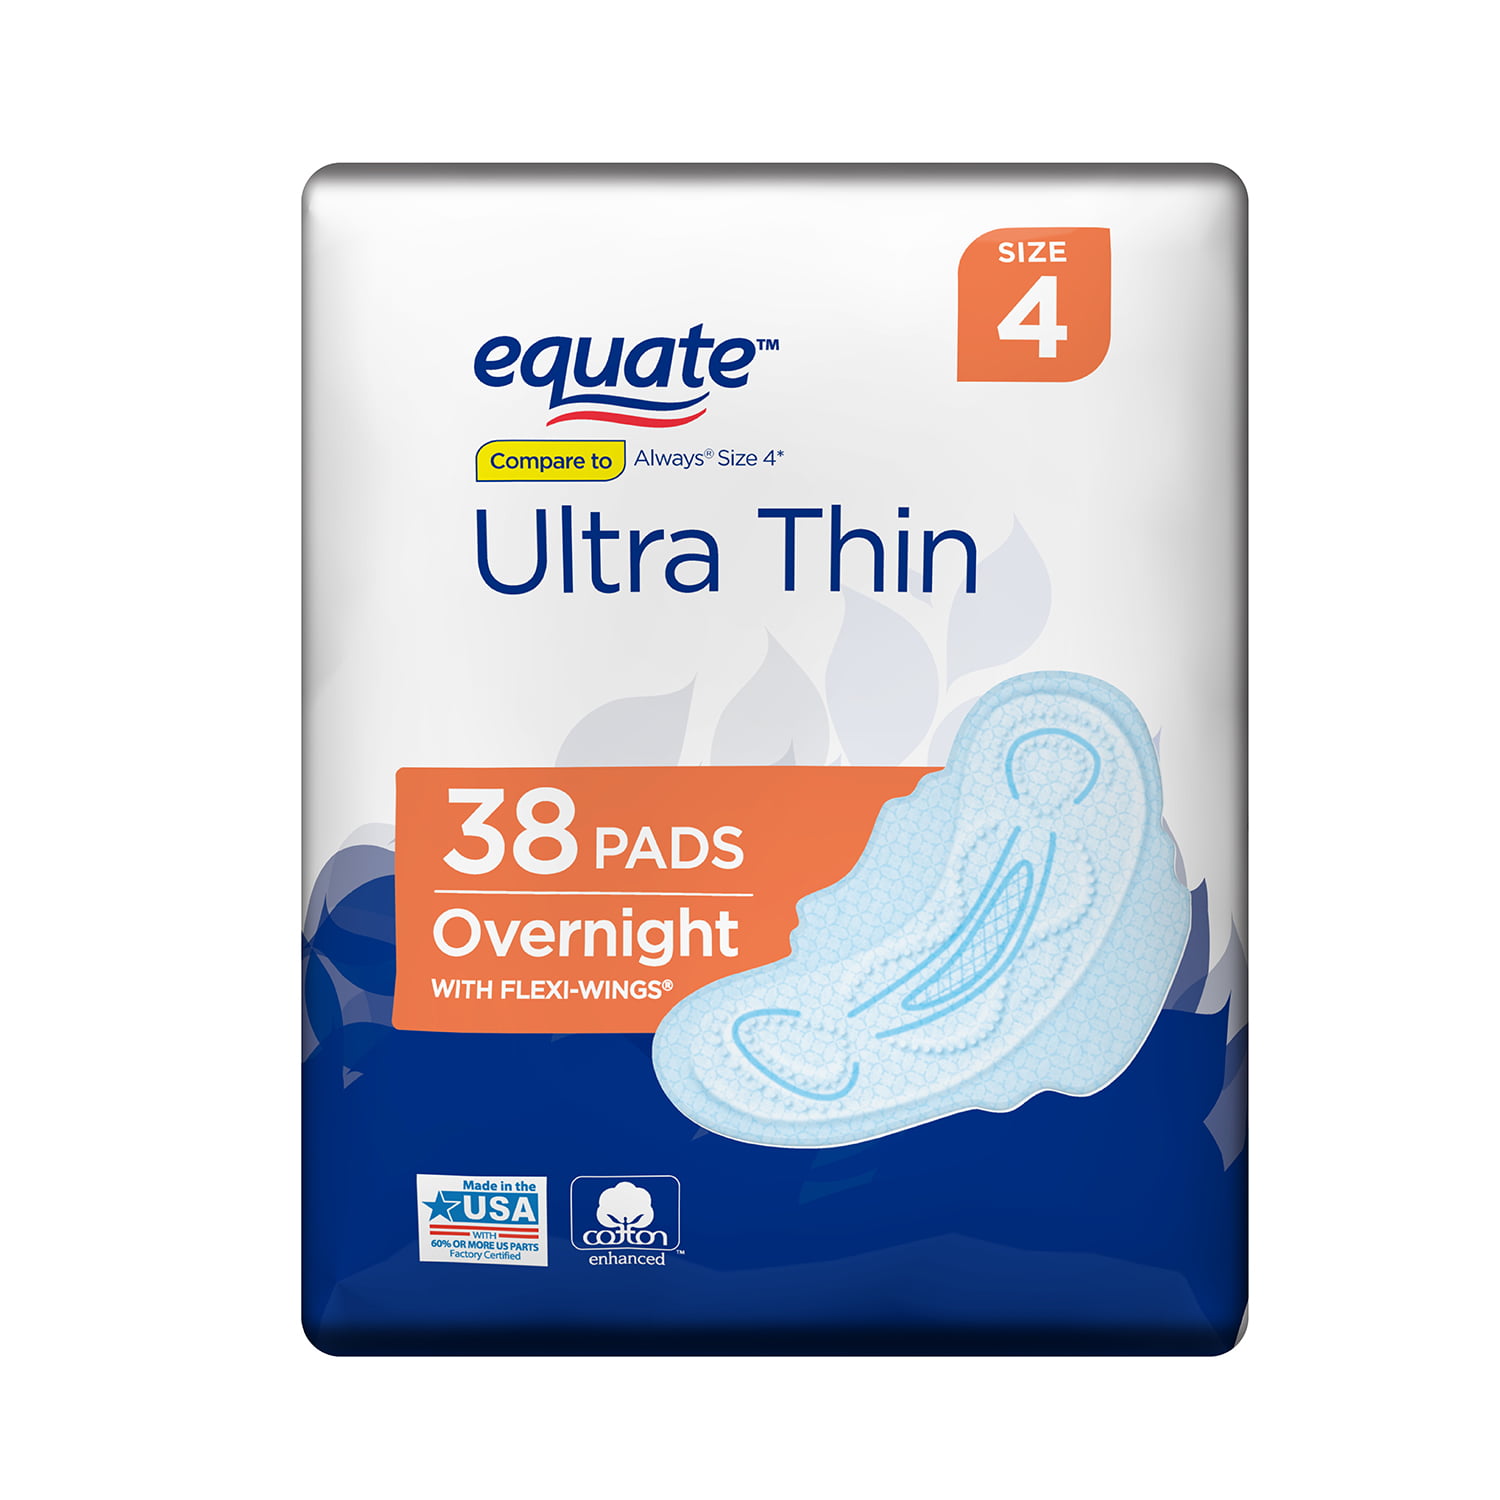 Equate Ultra Thin, Size 4, Overnight Pads with Flexi-Wings, 38 Ct ...